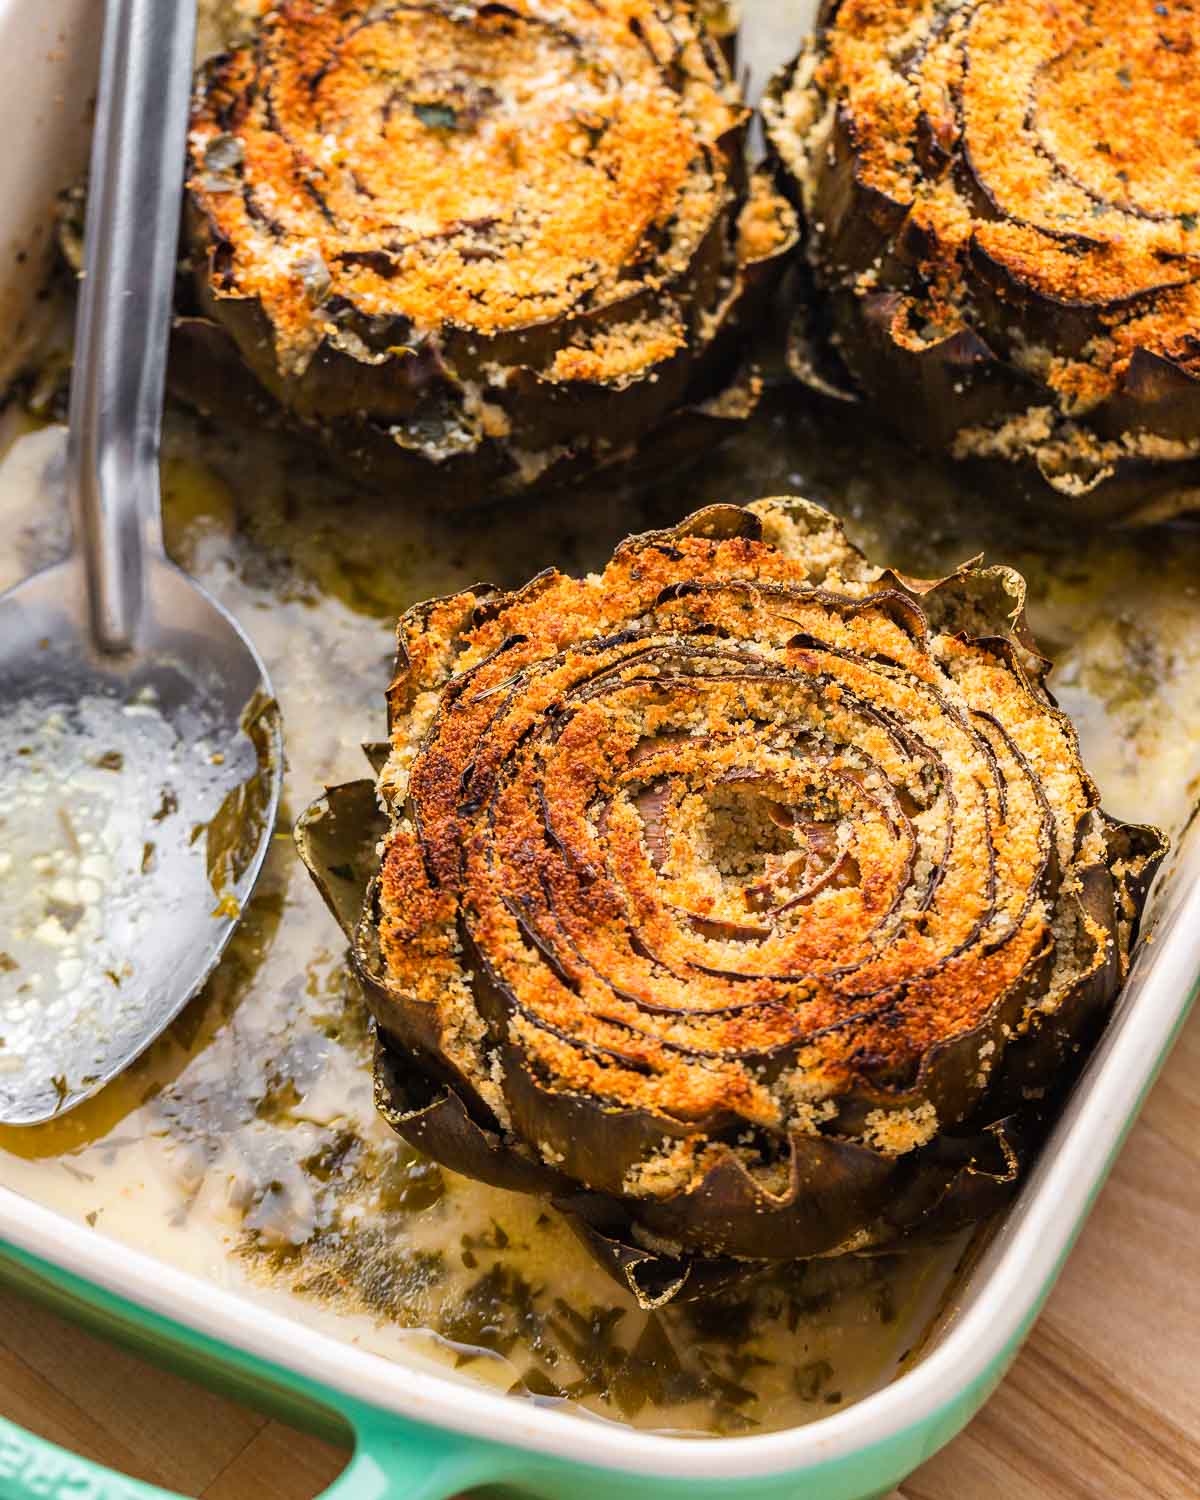 Cooked stuffed artichokes in baking dish.